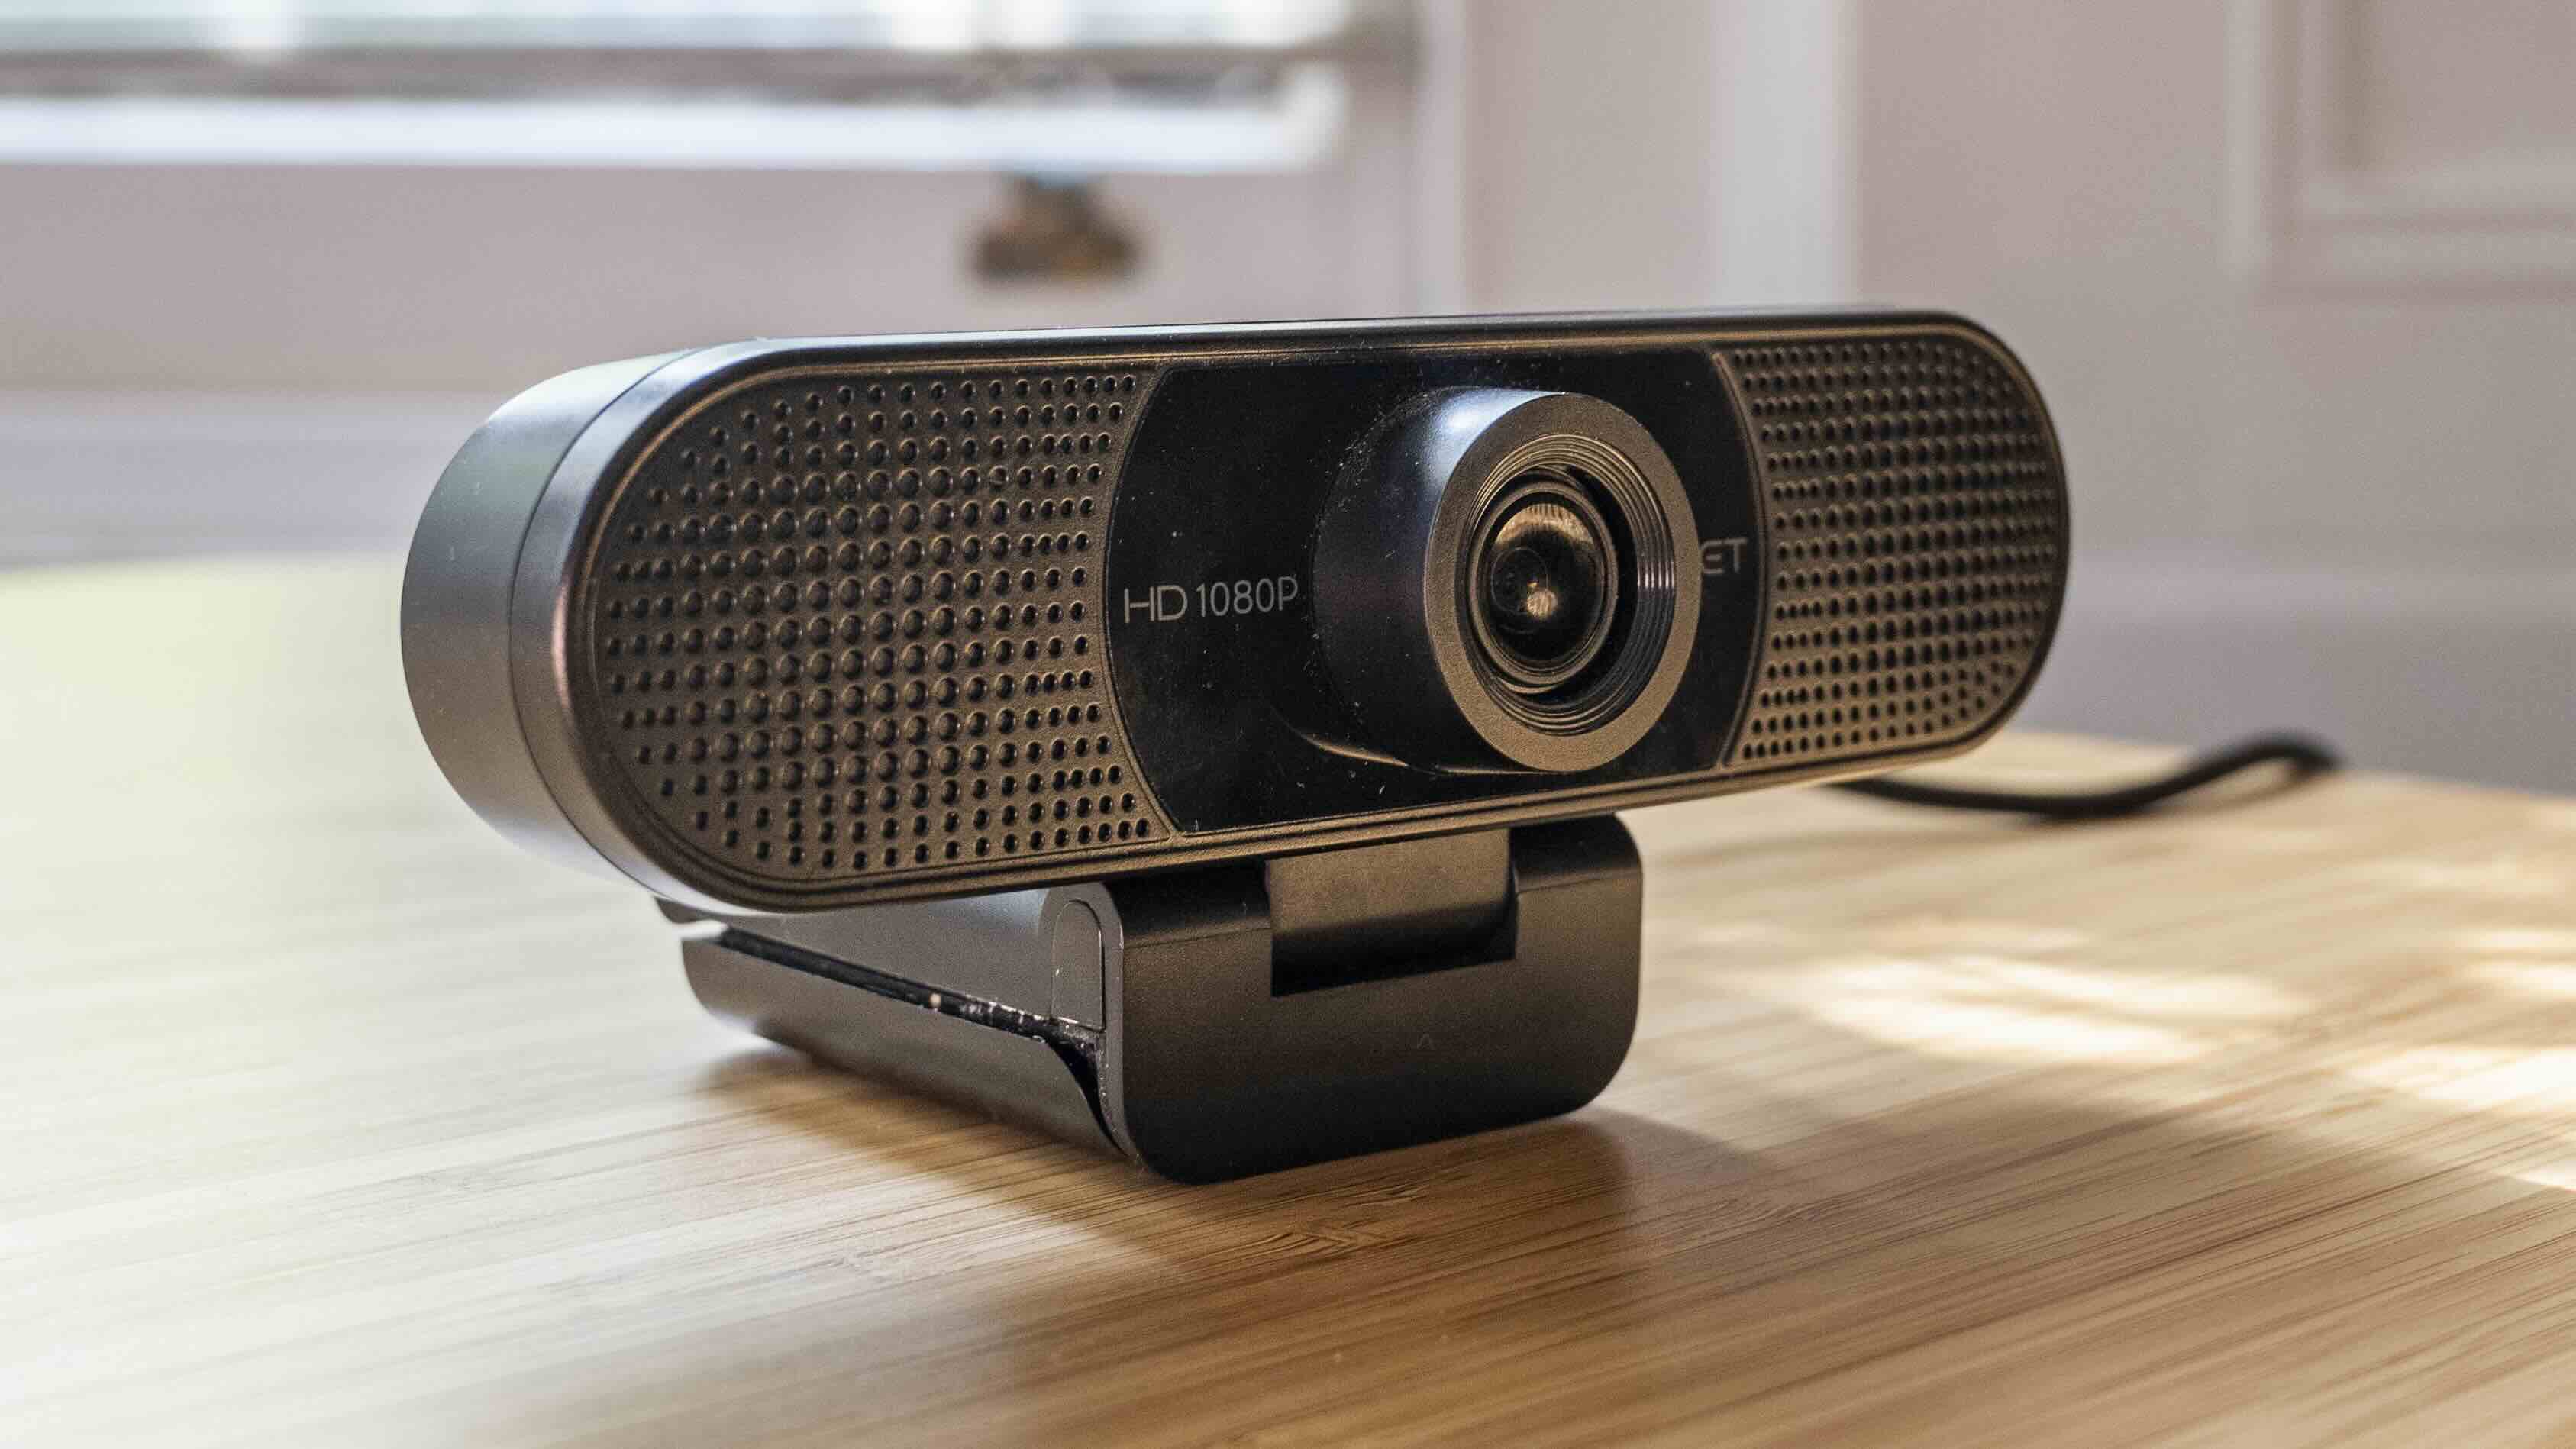 Webcam Review: Top Picks and Expert Recommendations